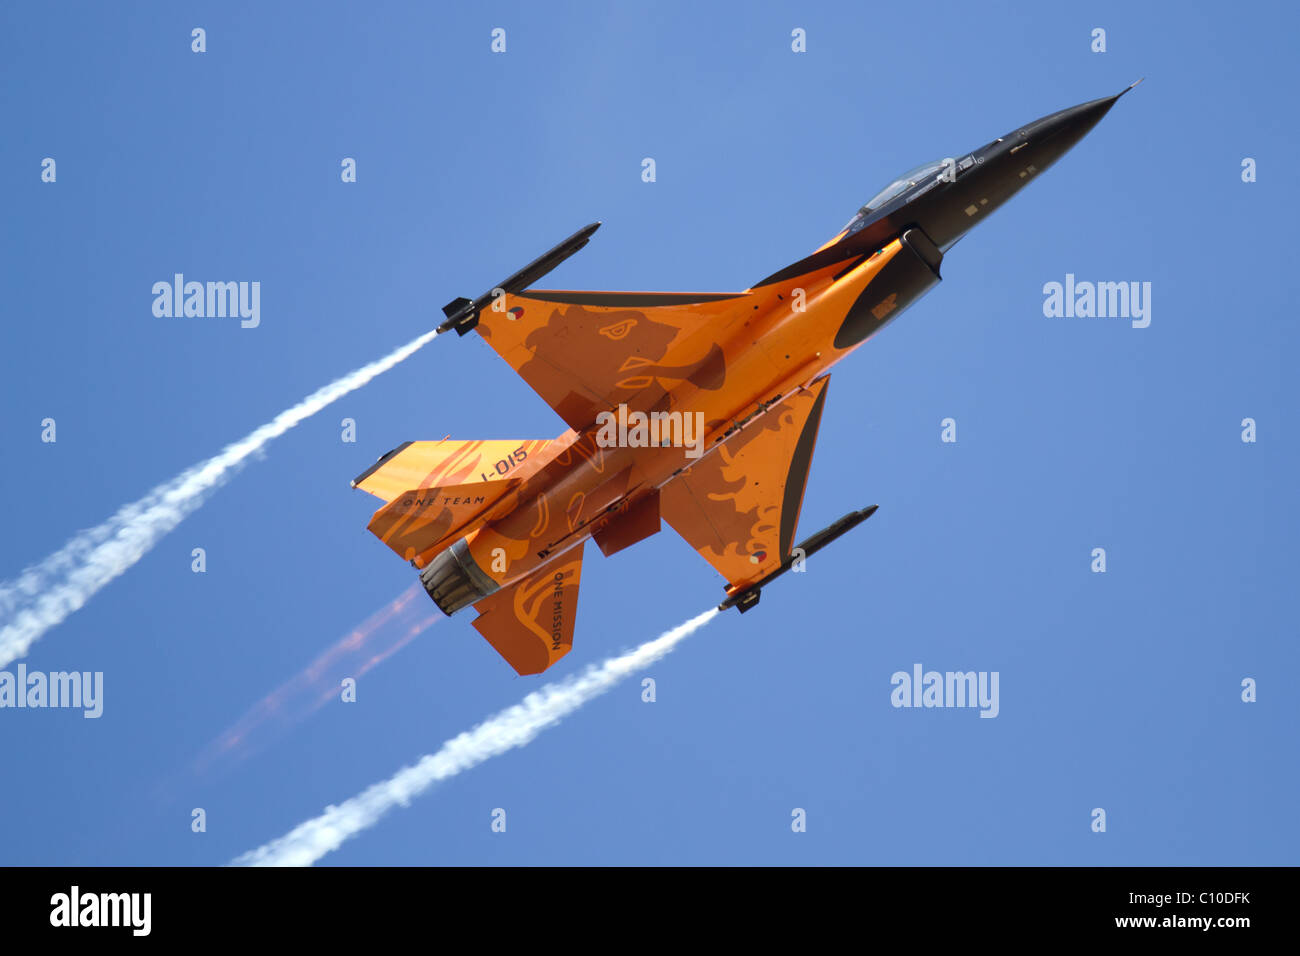 Royal Netherlands Air Force f-16 Fighting Falcon am Royal International Air Tattoo 2010 in Fairford. Stockfoto